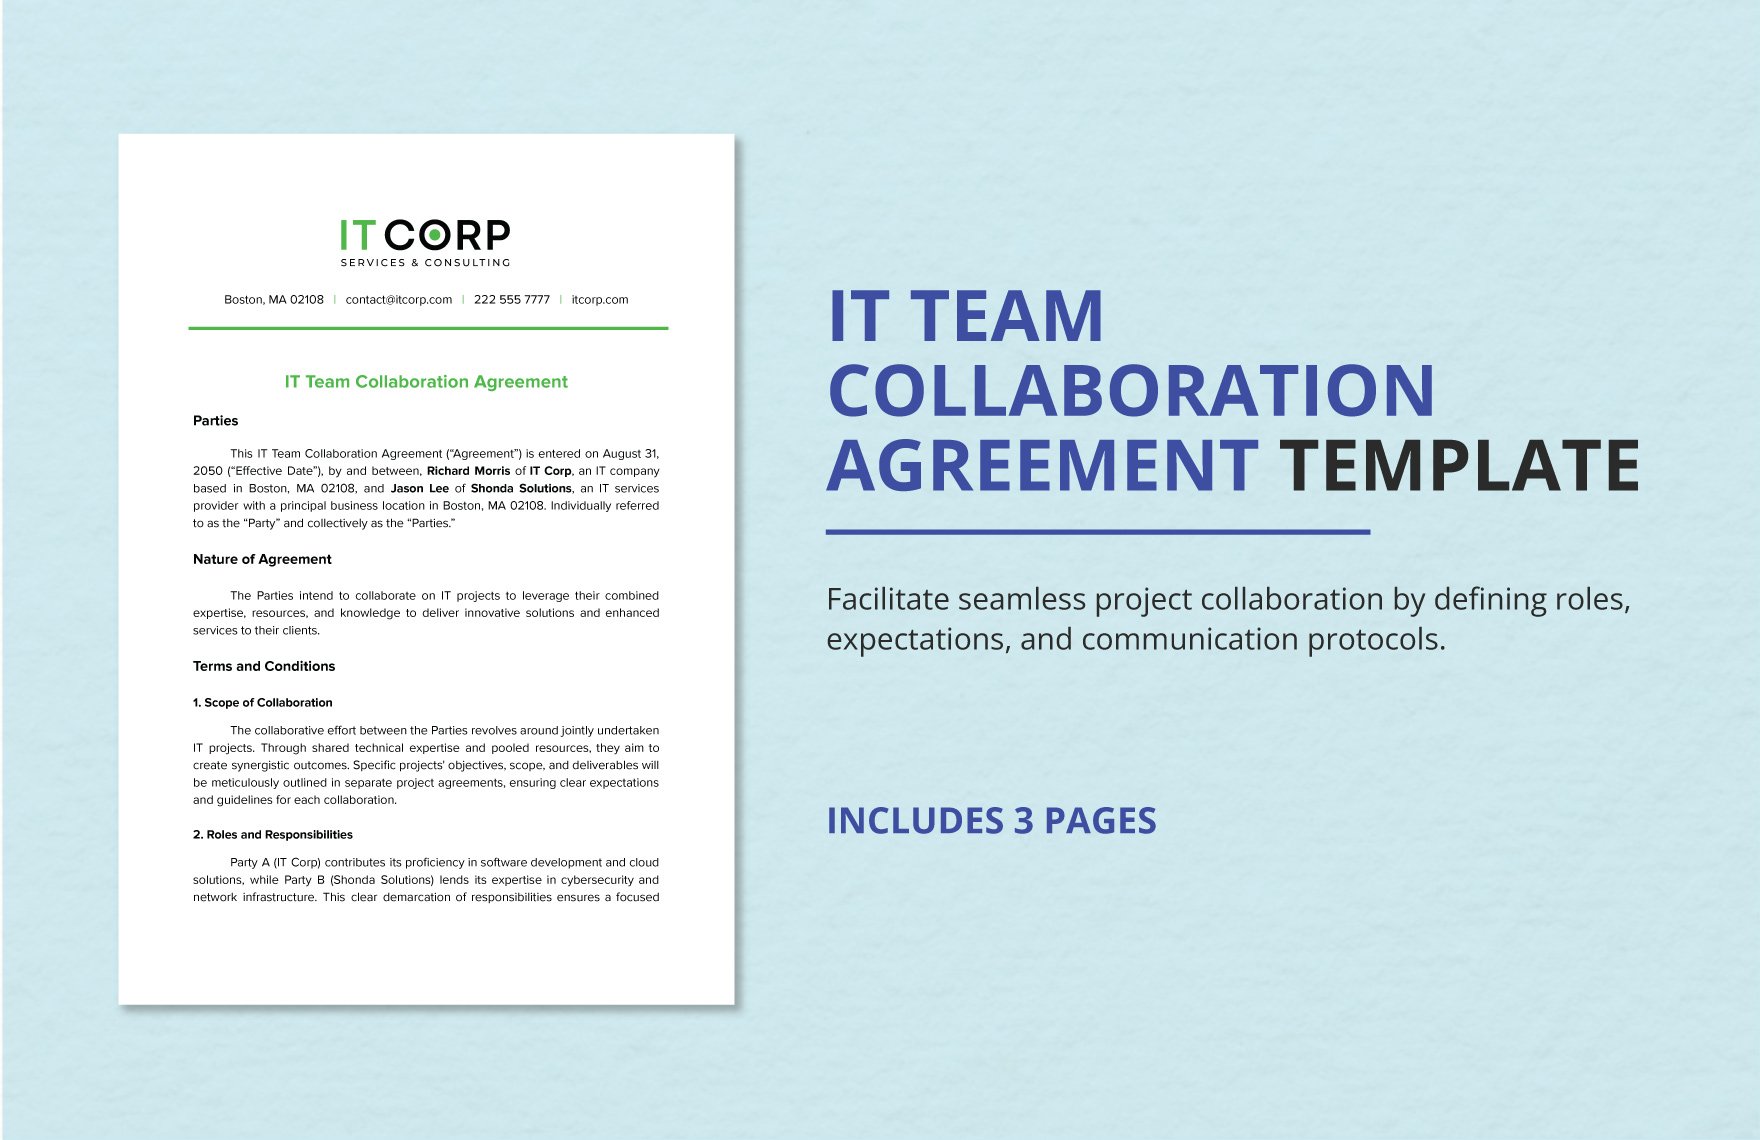 IT Team Collaboration Agreement Template